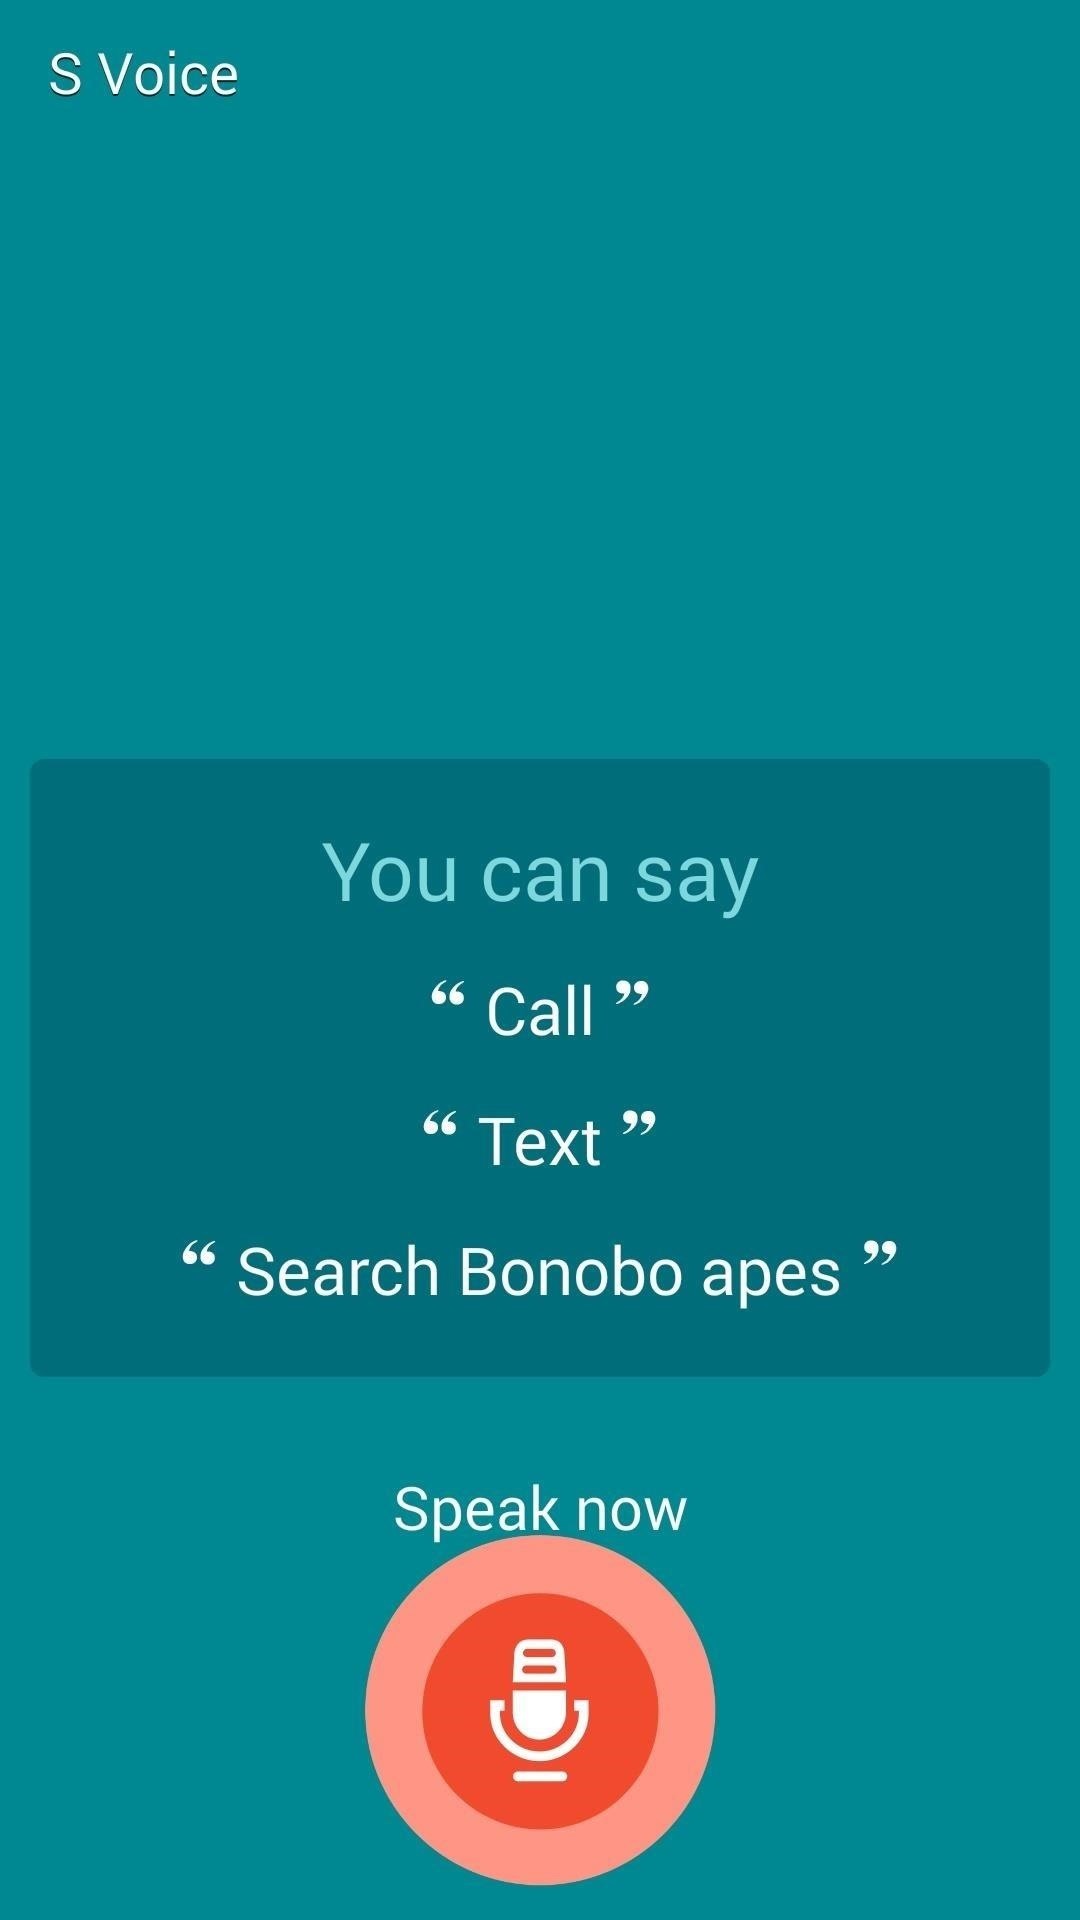 How to Get the Galaxy S5's New S Voice App on Your Samsung Galaxy S4